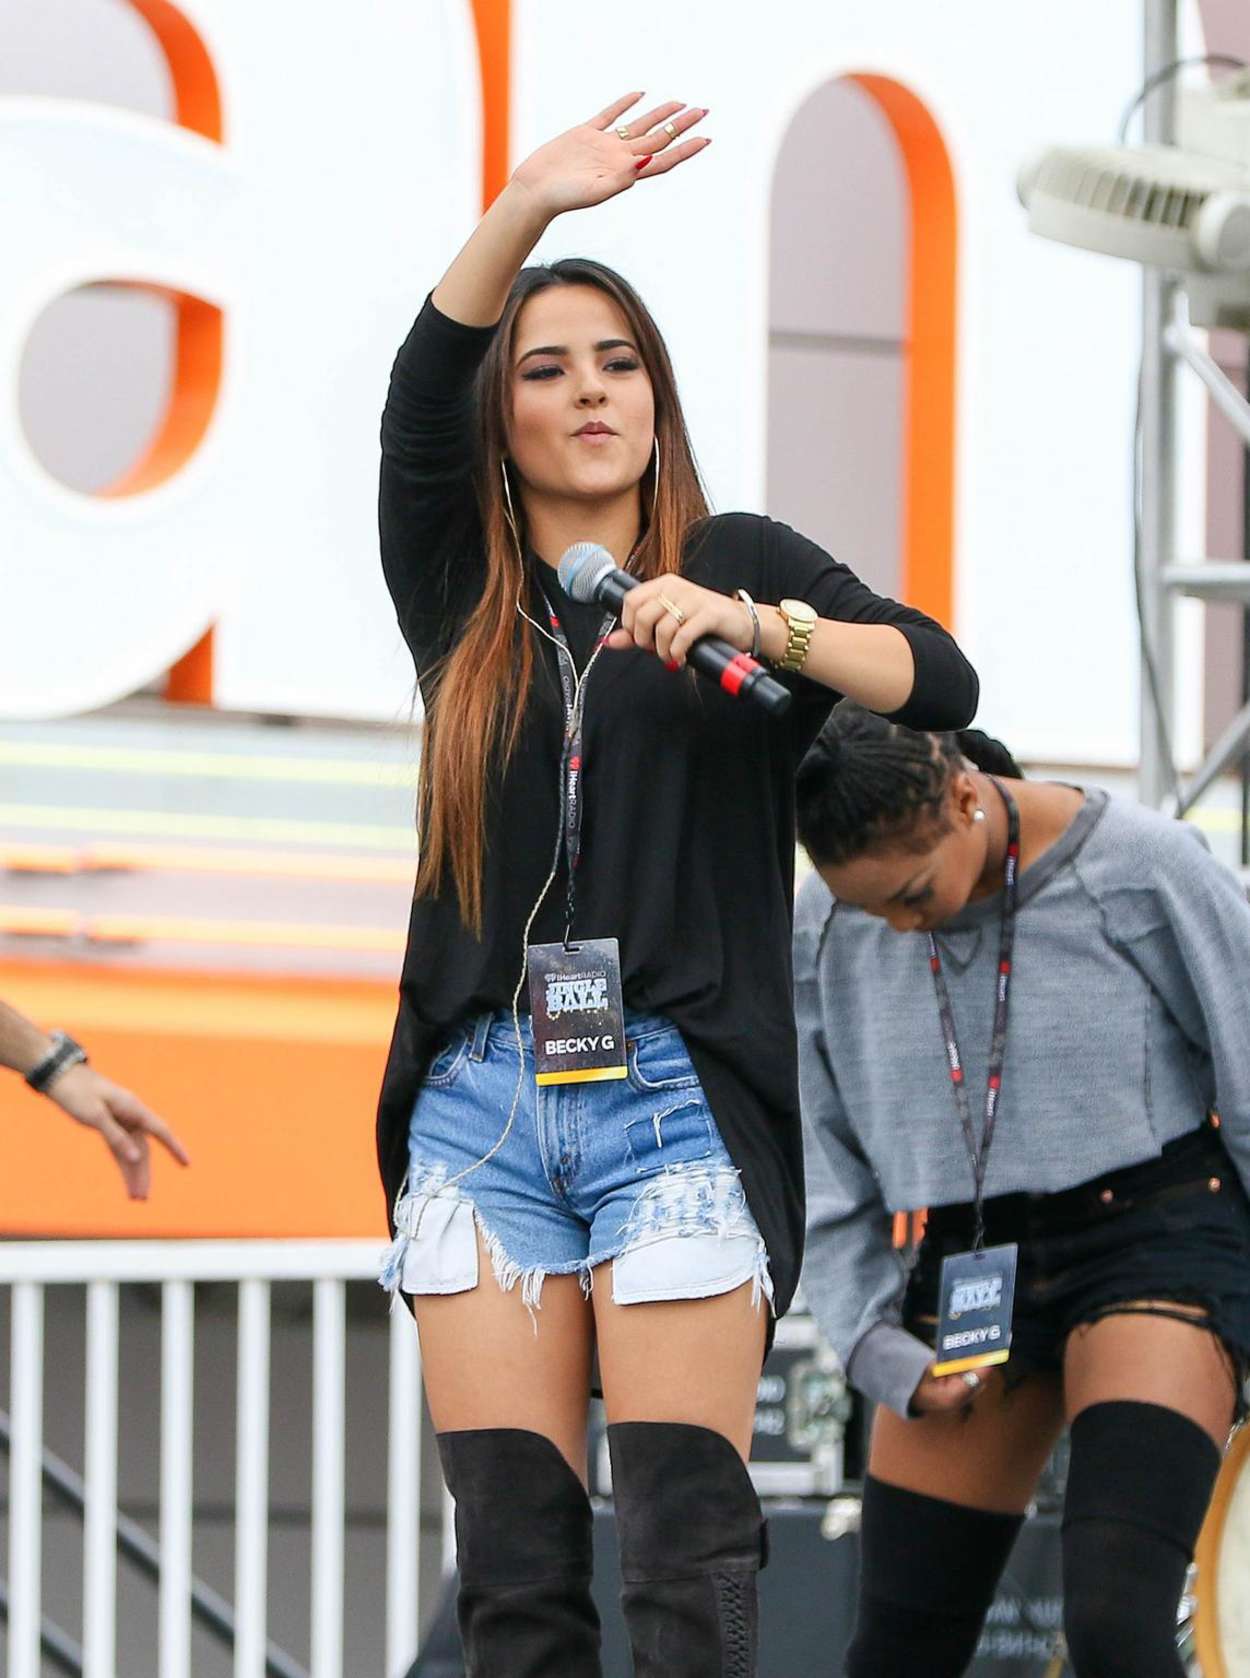 Becky G 2014 : Becky G in Jeans Shorts -19. 